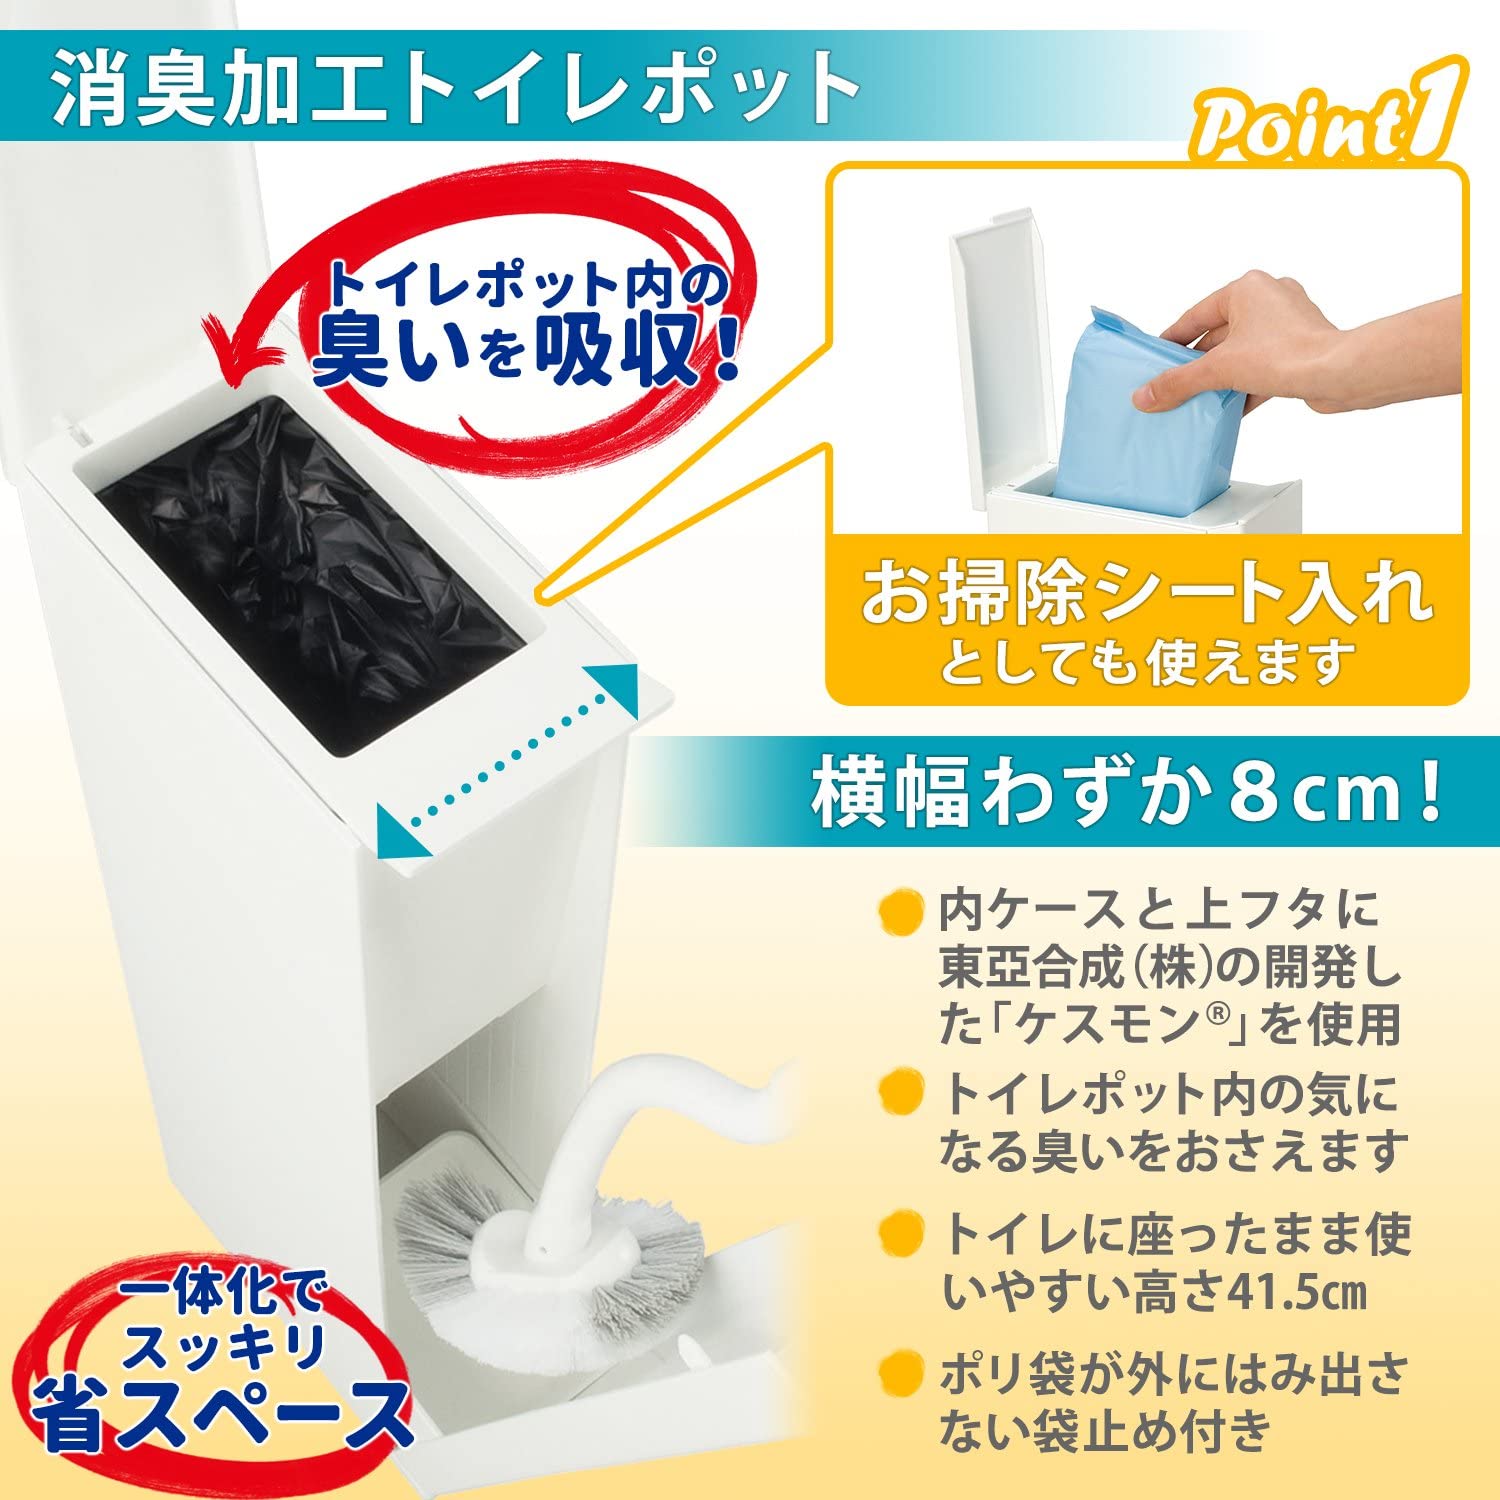 LEC(レック) トイレステーションの商品画像サムネ4 